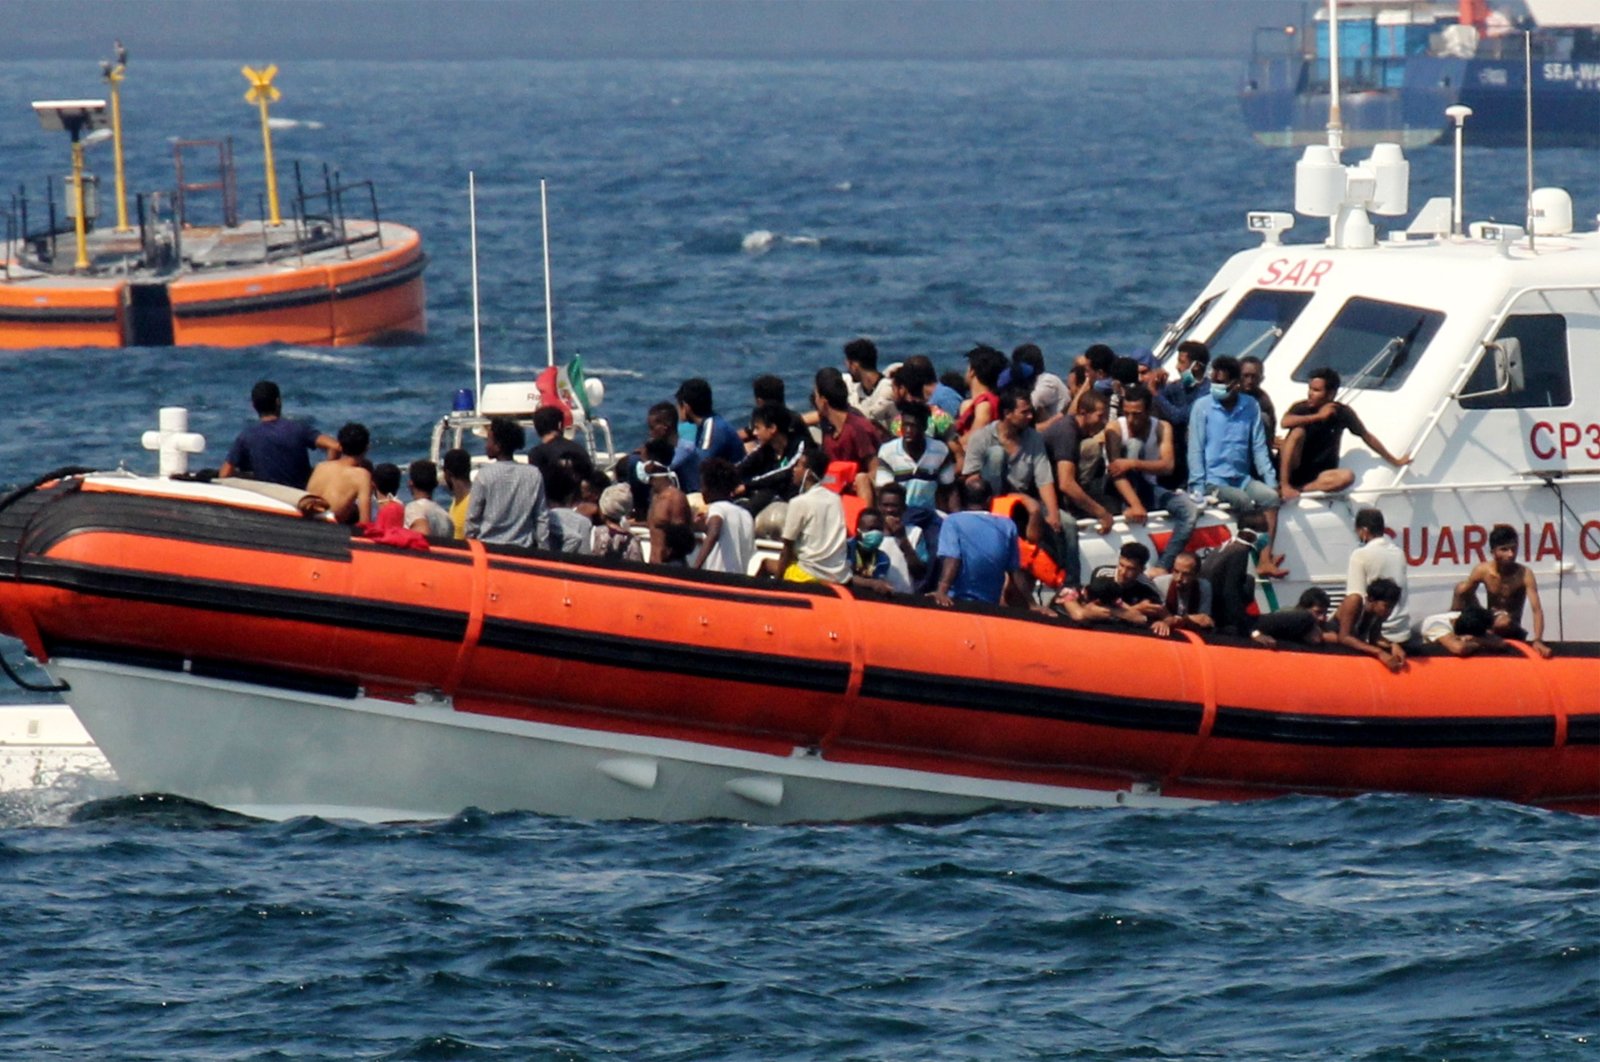 A patrol boat of the Italian Coast Guards (Guardia Costiera) transports migrants towards the port of Palermo, Sicily after they rescued them at sea after a group of 76 migrants threw themselves into the water from the rescue vessel of Spanish non-governmental organization Open Arms, off Palermo, Sicily, Italy, Sept. 17, 2020. (AFP Photo)